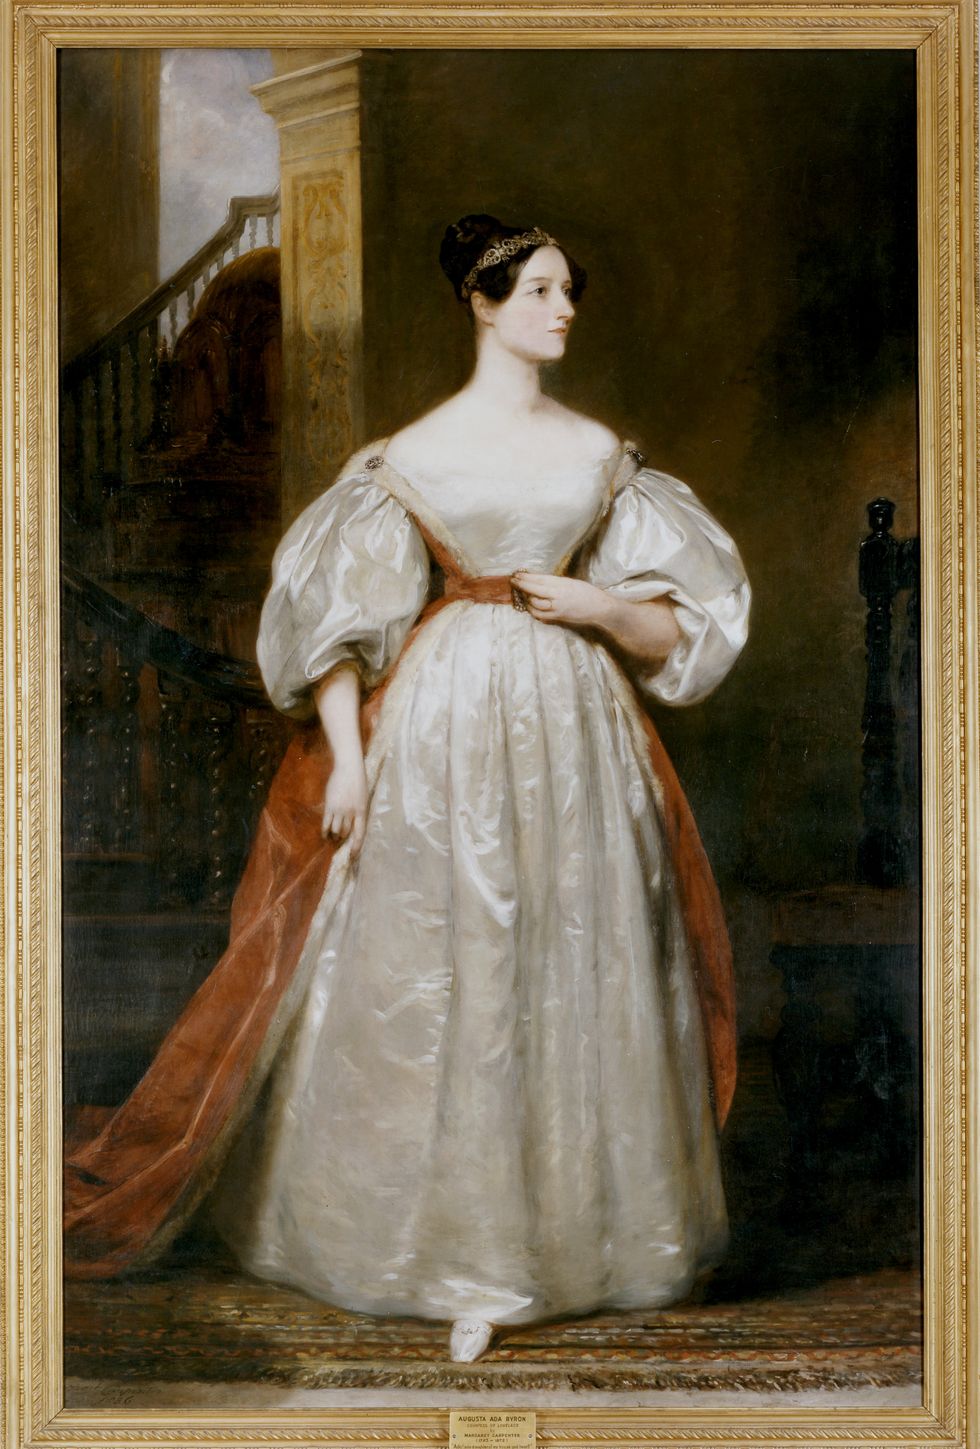 countess augusta ada lovelace 1815 1852, english mathematician and writer the daughter of byron and friend of charles babbage, she devised the programme for babbages analytical engine photo by ann ronan picturesprint collectorgetty images